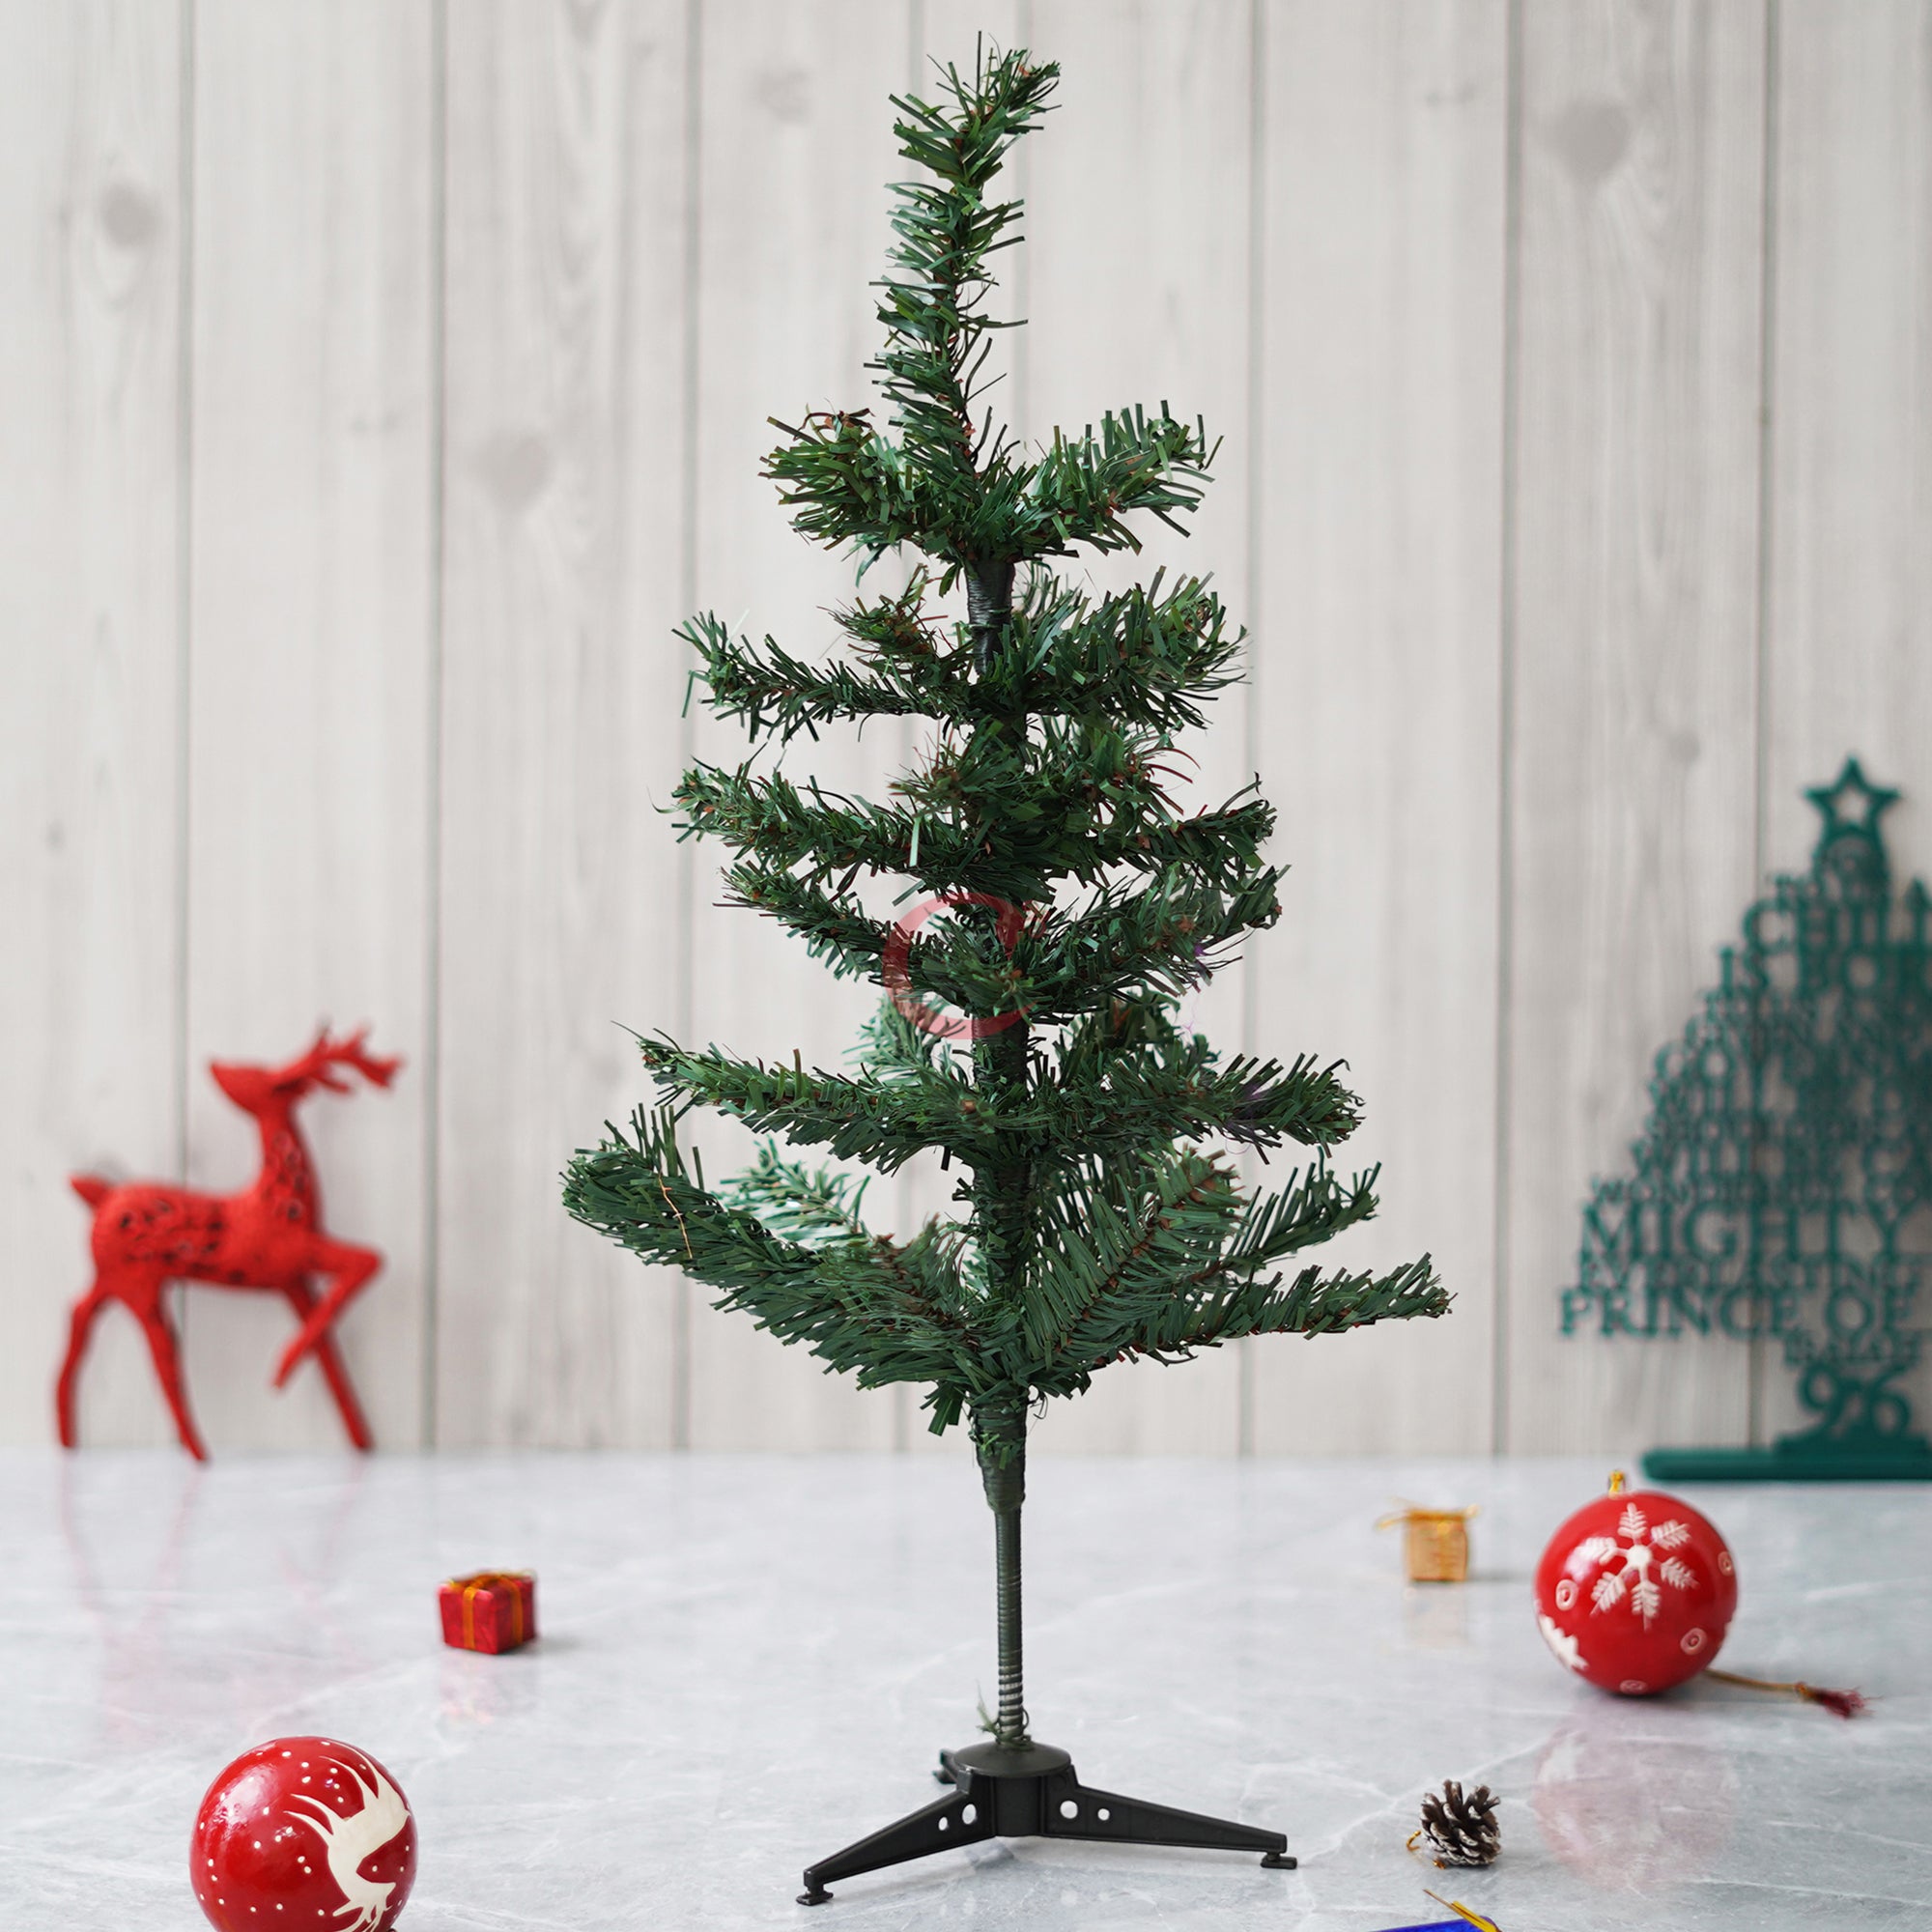 eCraftIndia 2 Feet Green Artificial Christmas Tree Xmas Pine Tree with Stand and 60 Christmas Decoration Ornaments Props - Merry Christmas Decoration Item for Home, Office, and Church 5